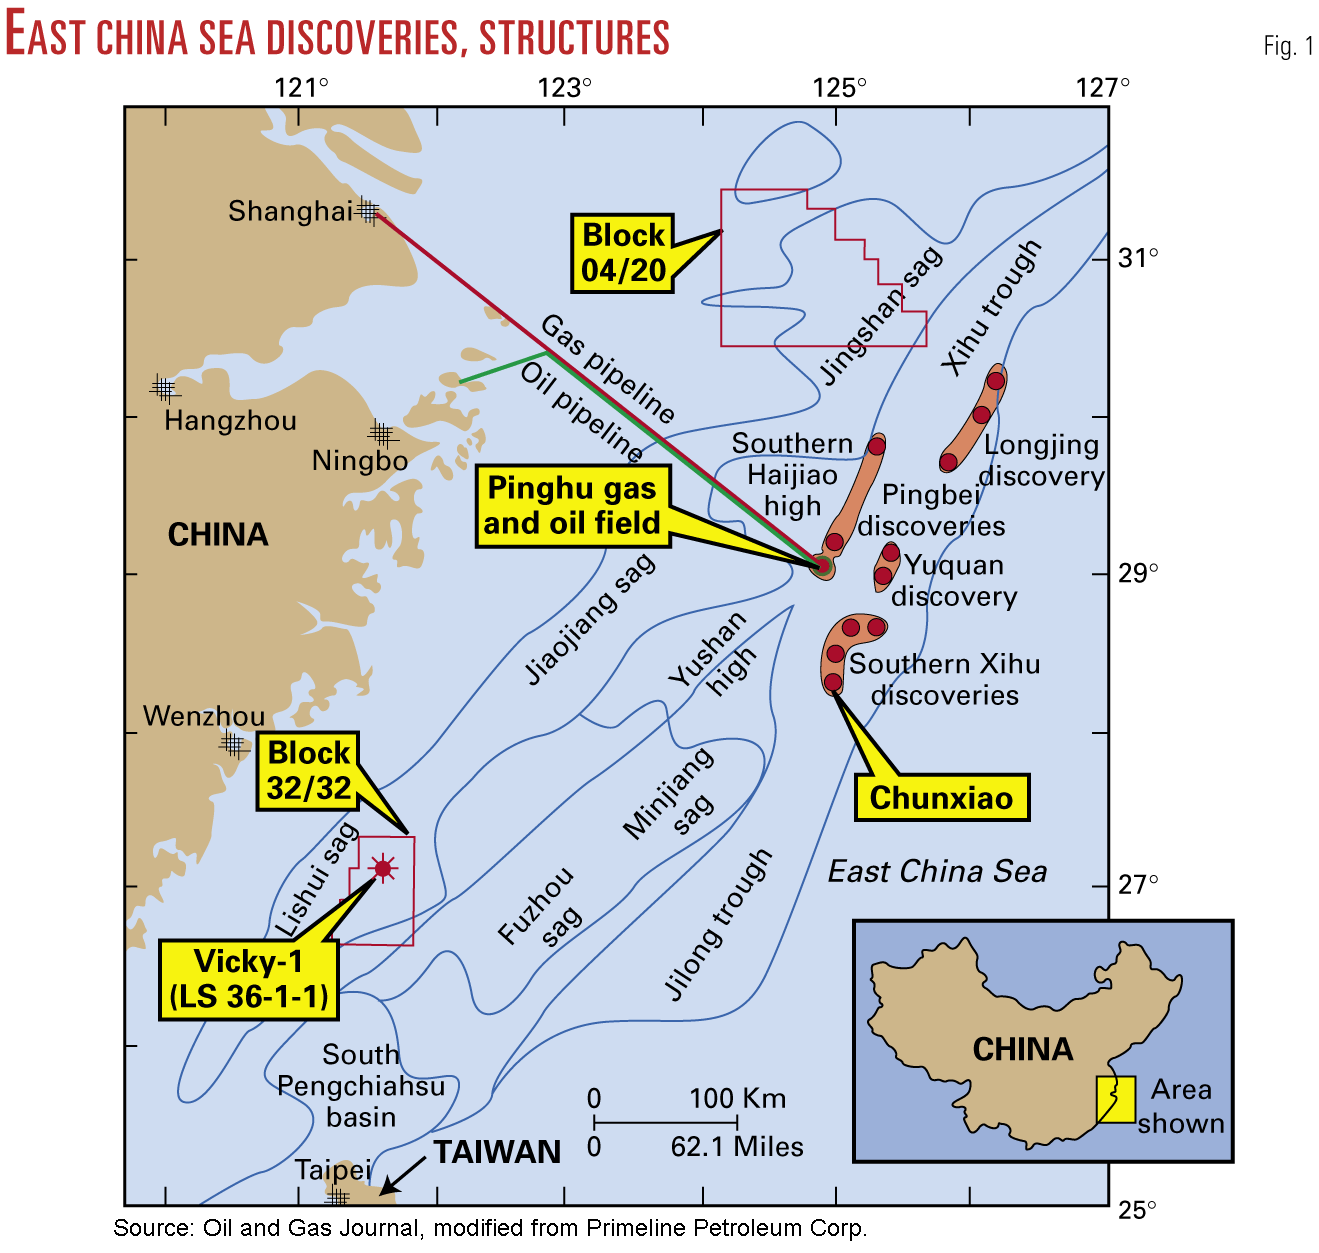 Map of East China Sea discoveries, structures